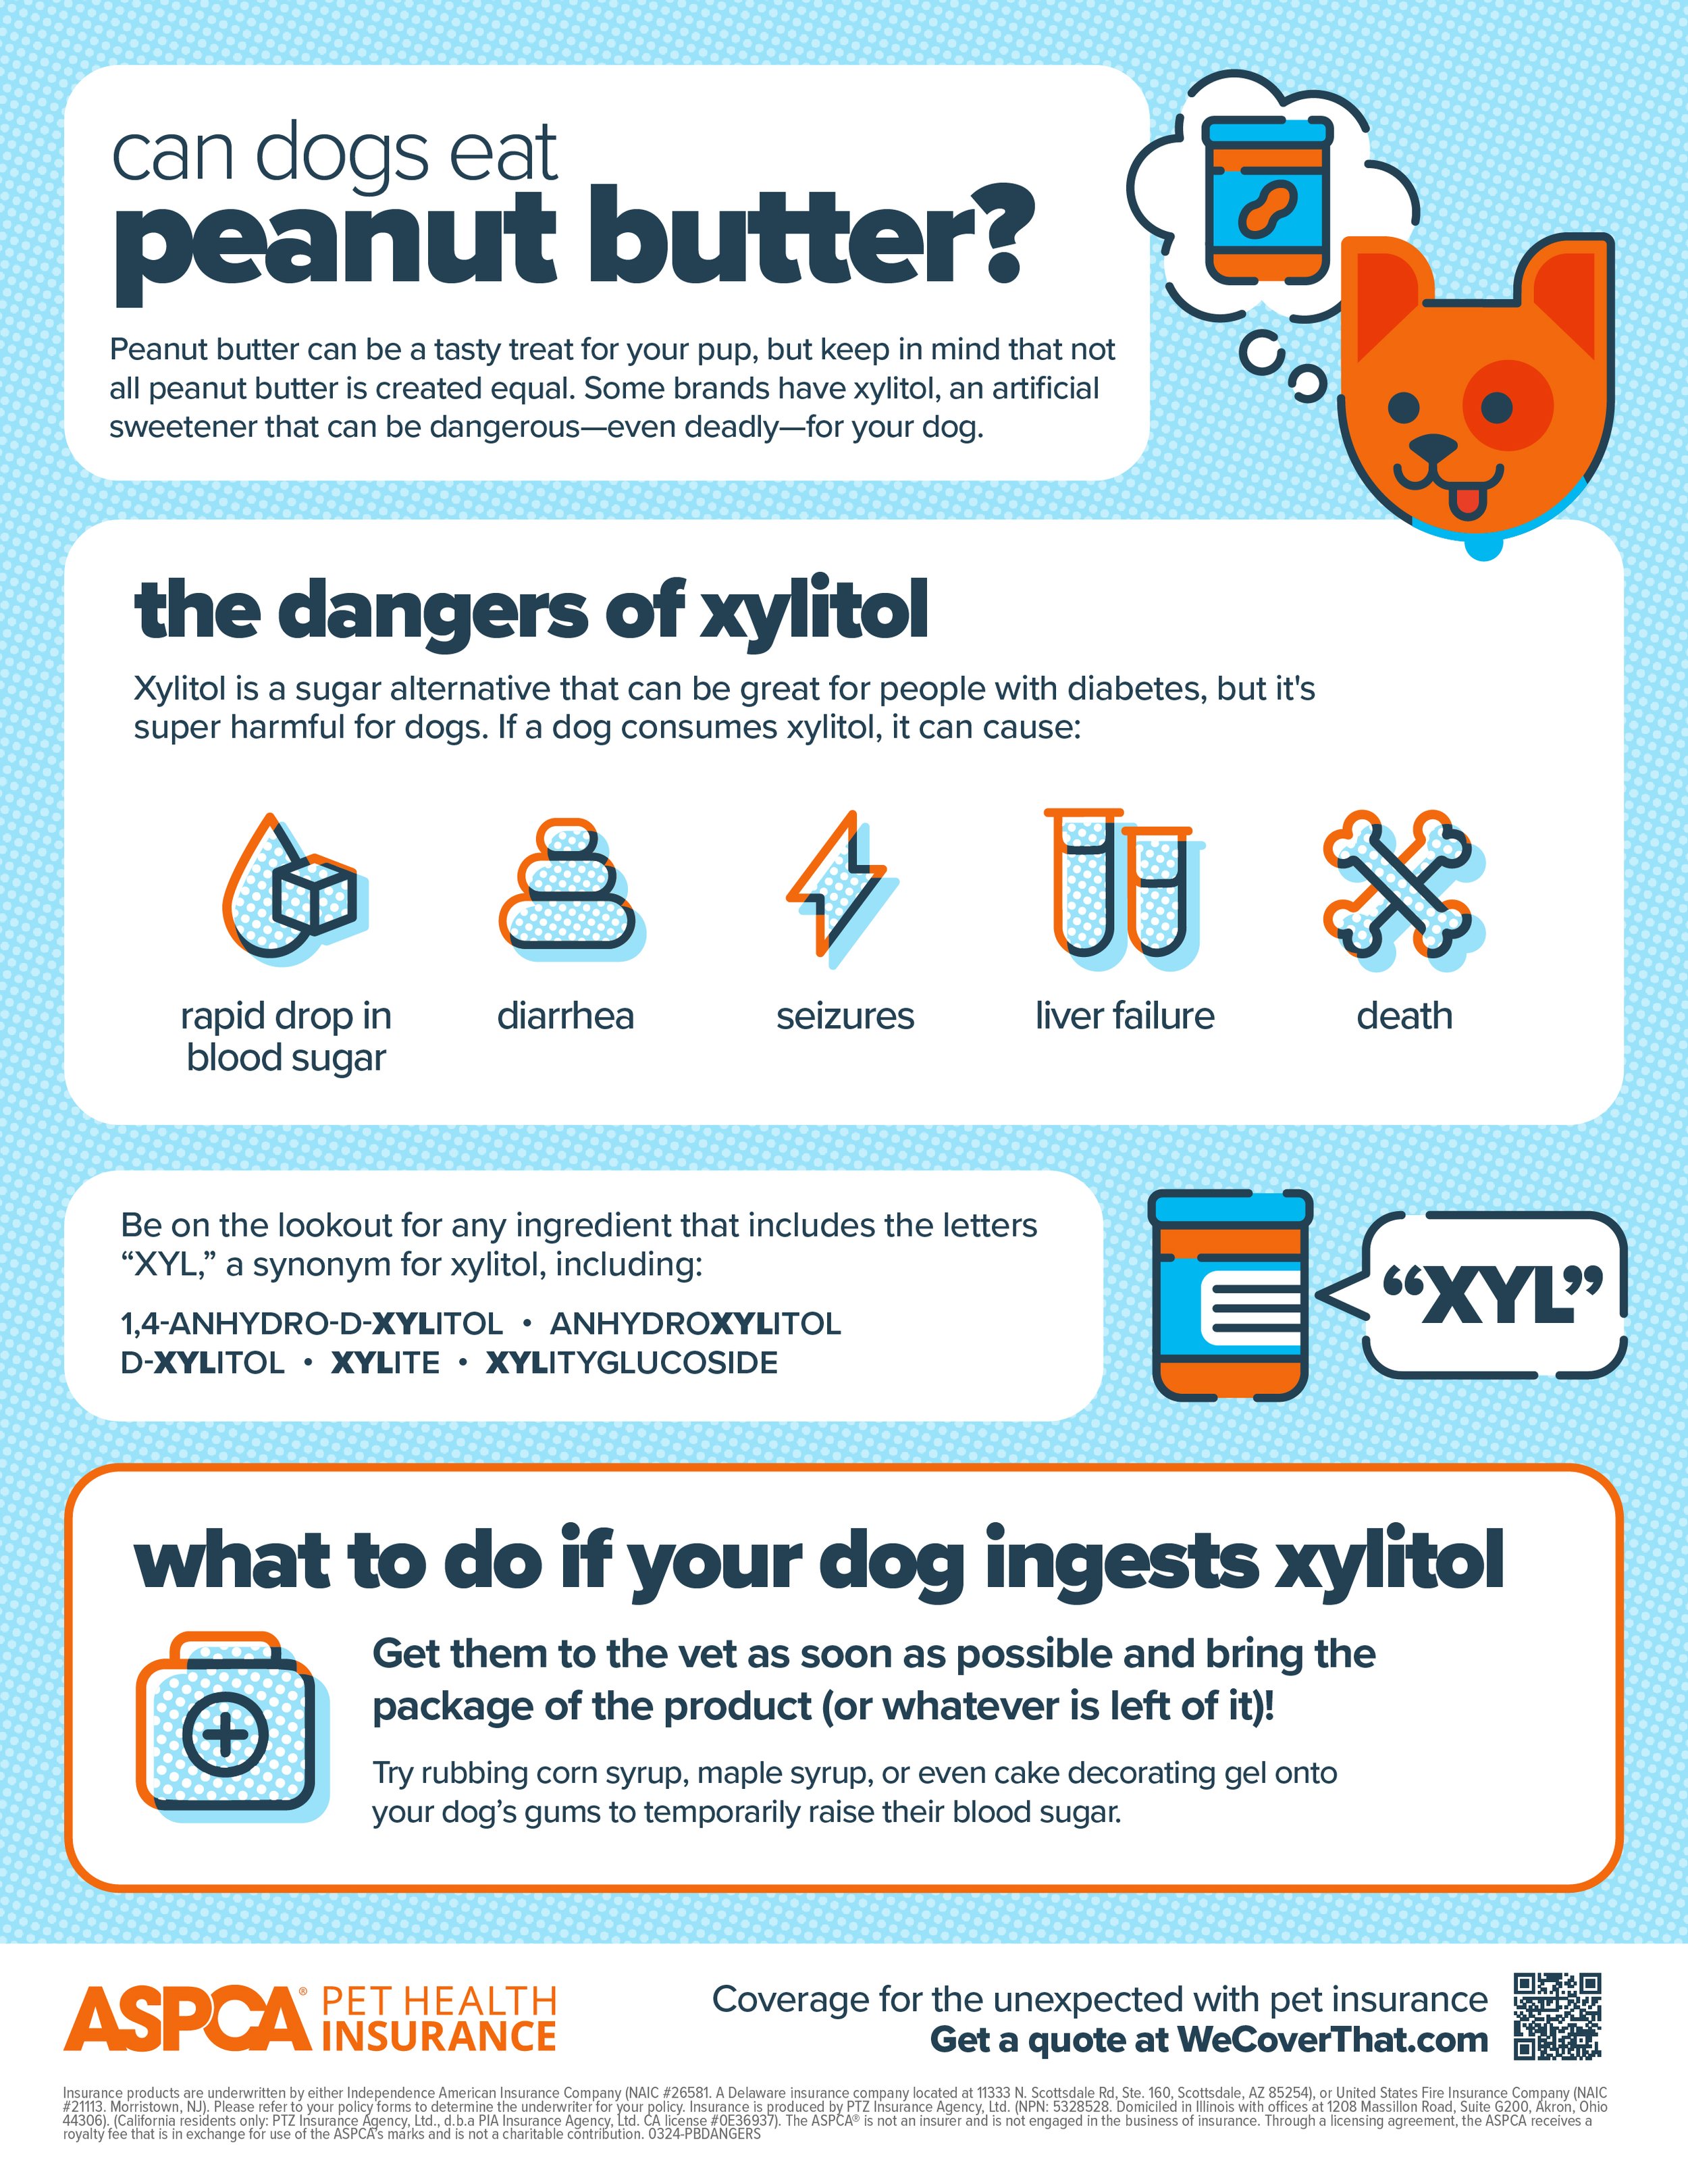 peanut-butter-dangers-of-xylitol.jpg